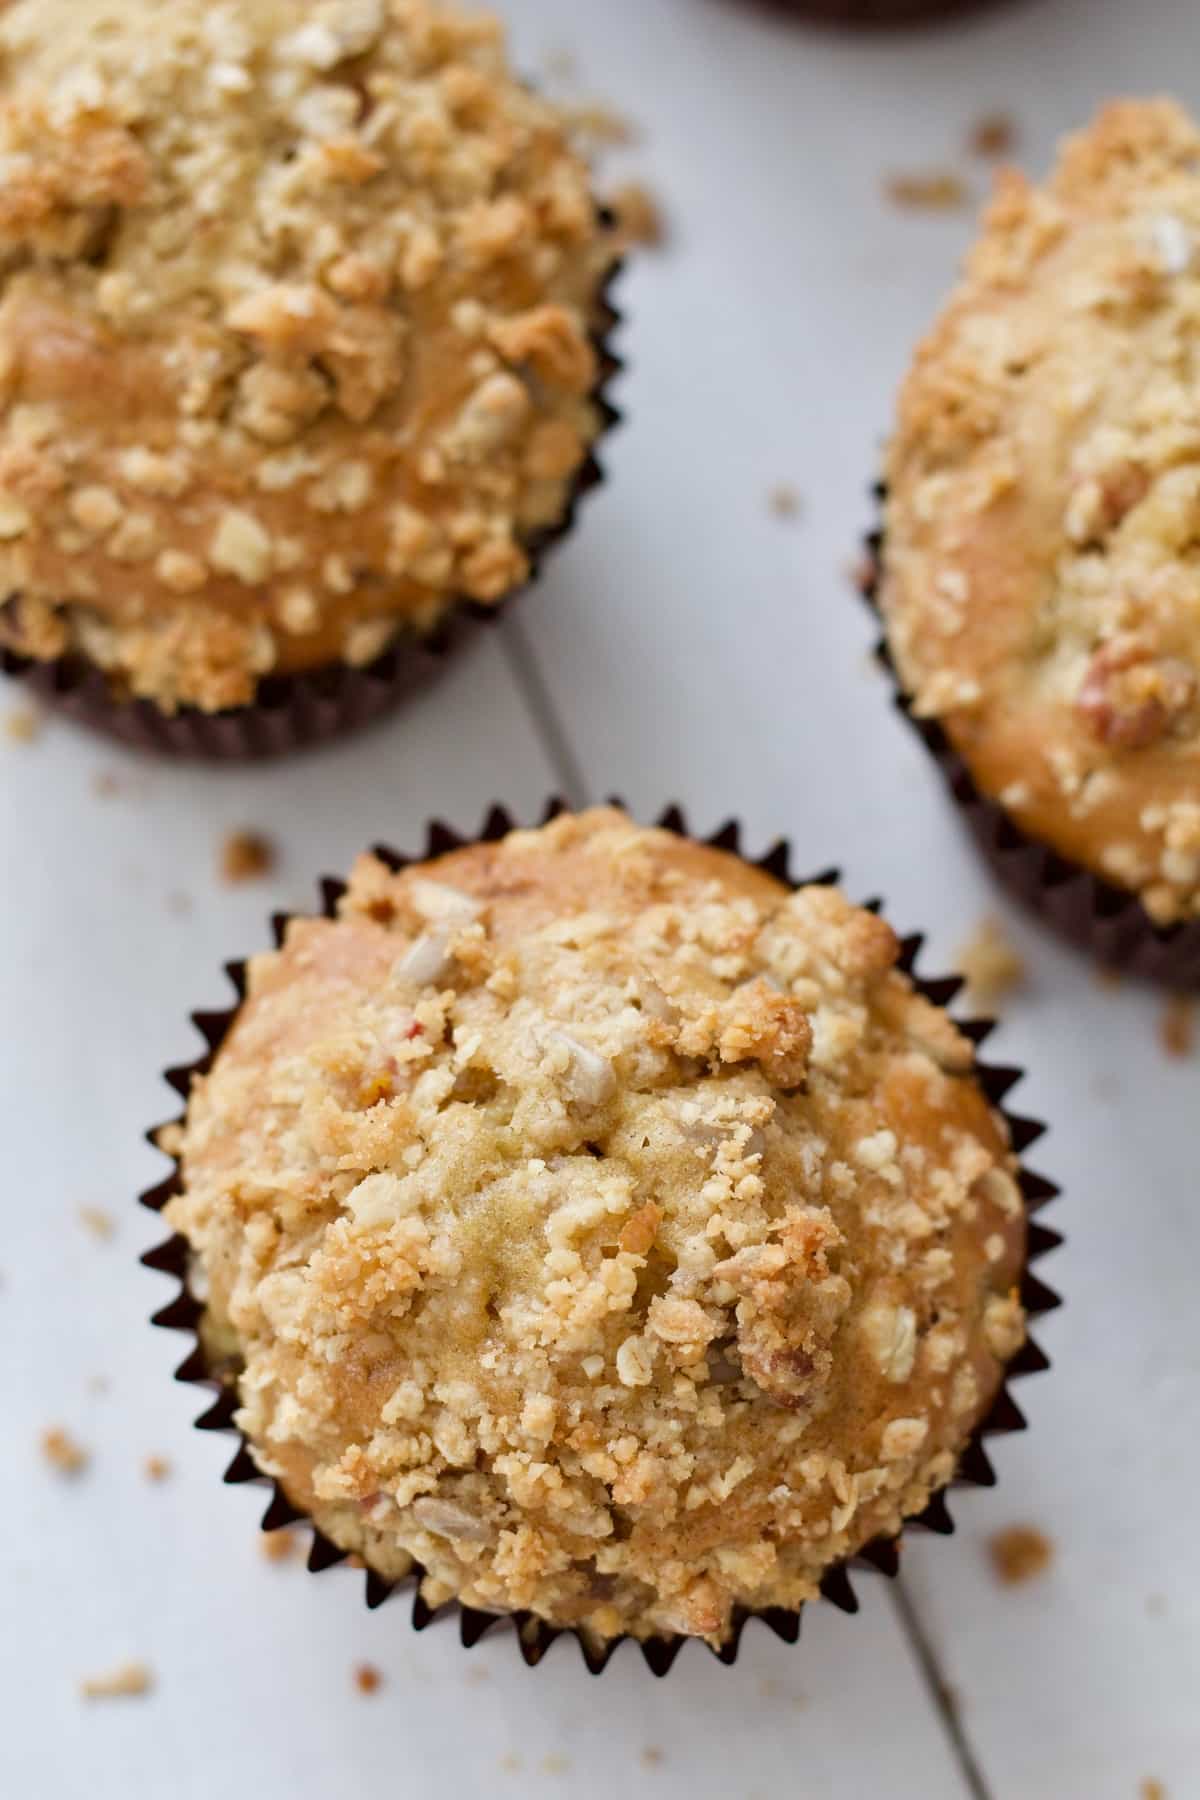 Close up of a top of a muffin showing crumble topping.